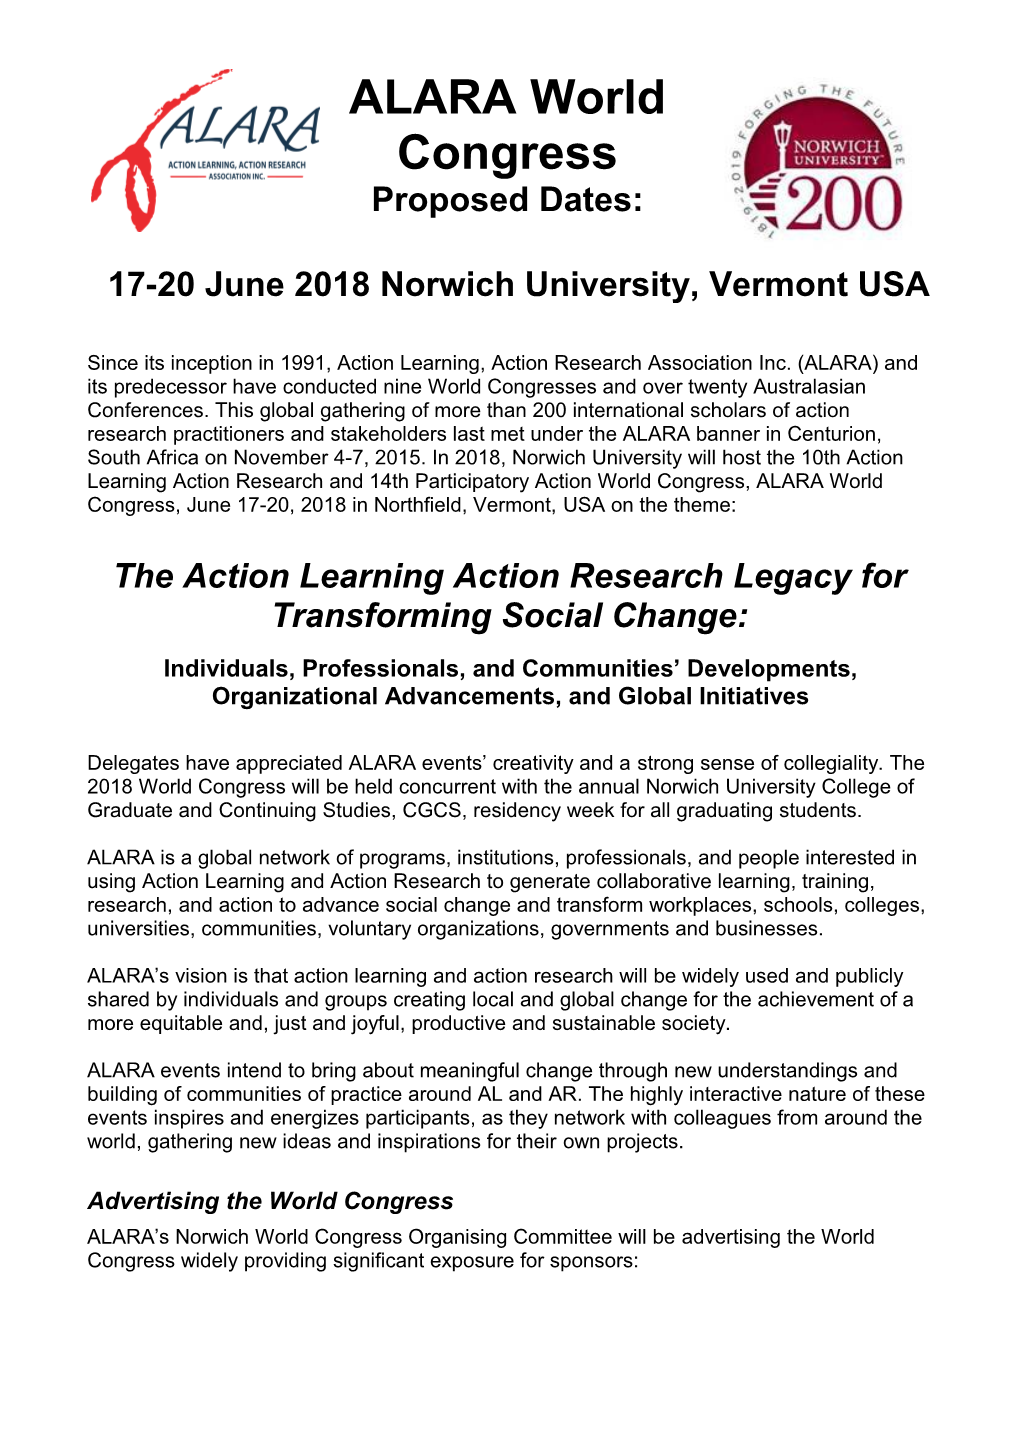 The Action Learning Action Research Legacy for Transforming Social Change